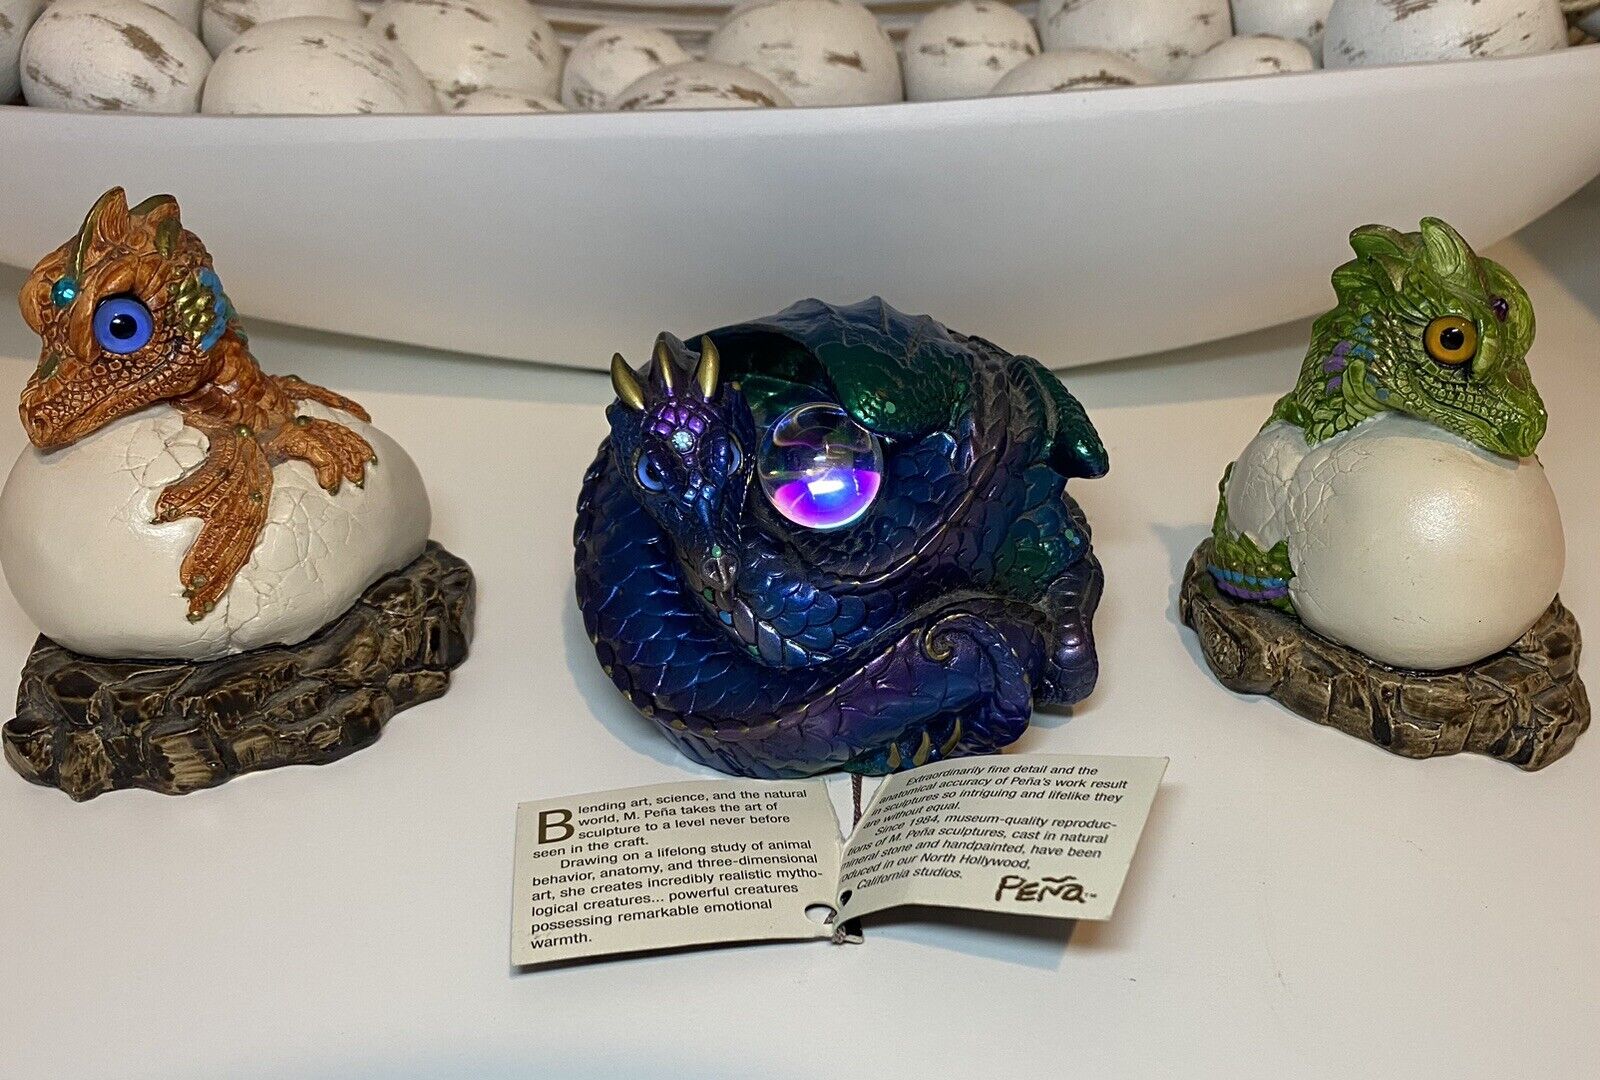 3 VTG Pena Windstone Editions Hatching Baby & Coiled Dragons Sculptured Figures